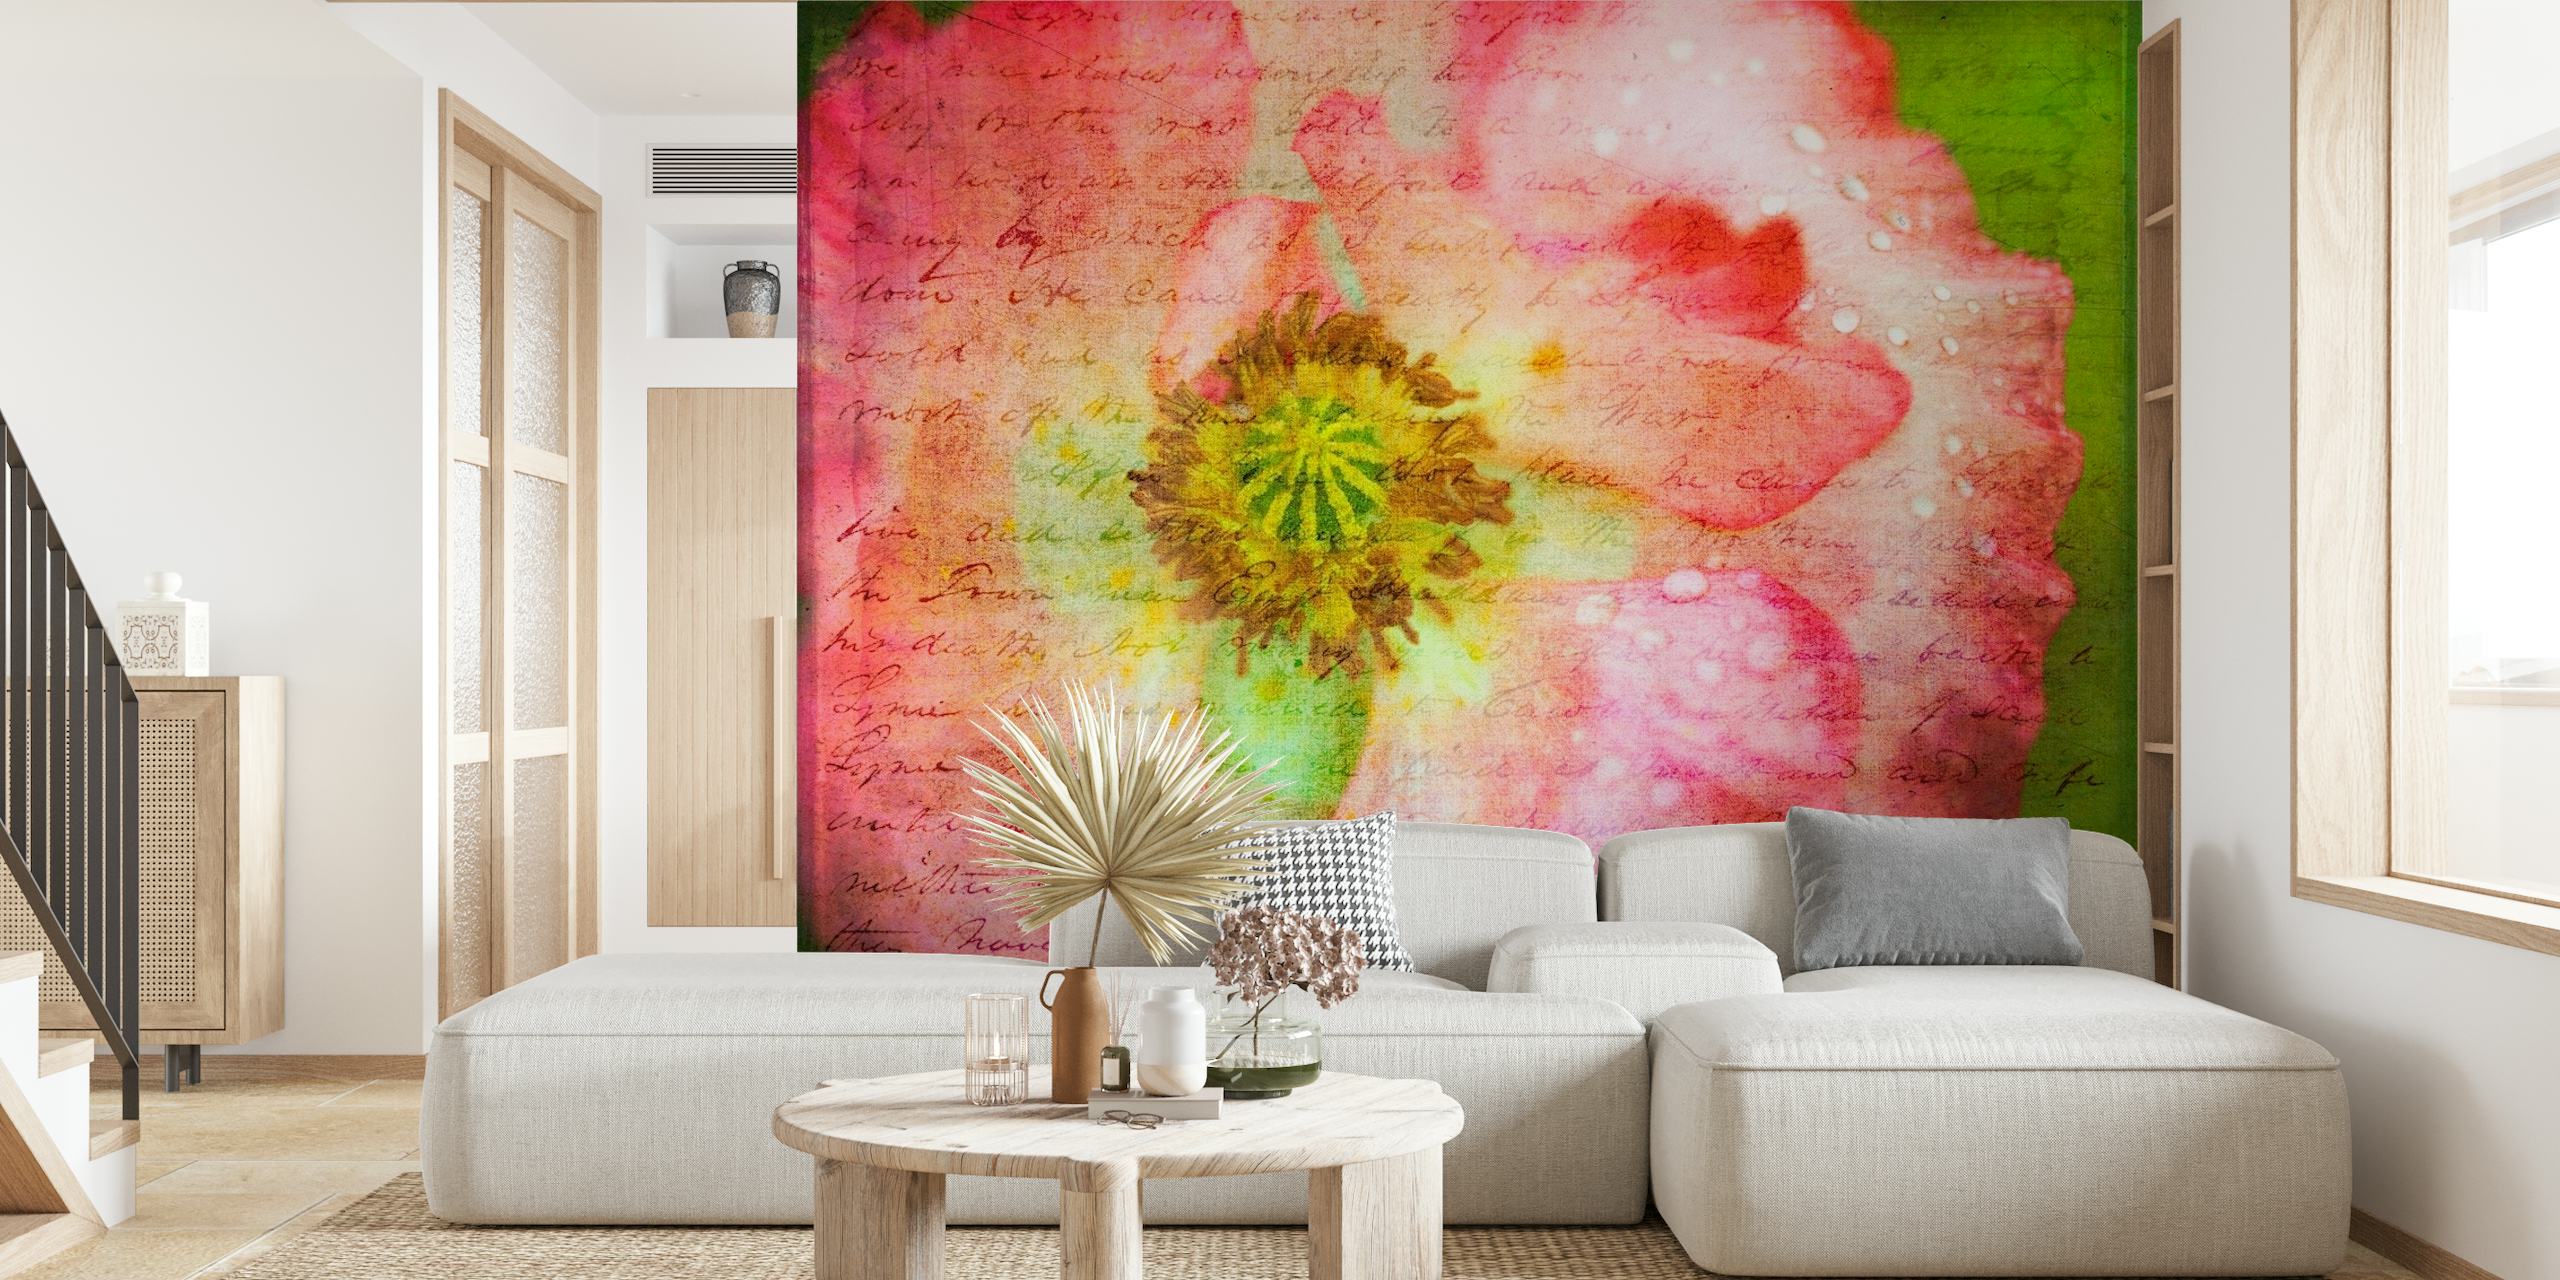 Artistic rendition of a pink poppy flower with a textured green background wall mural